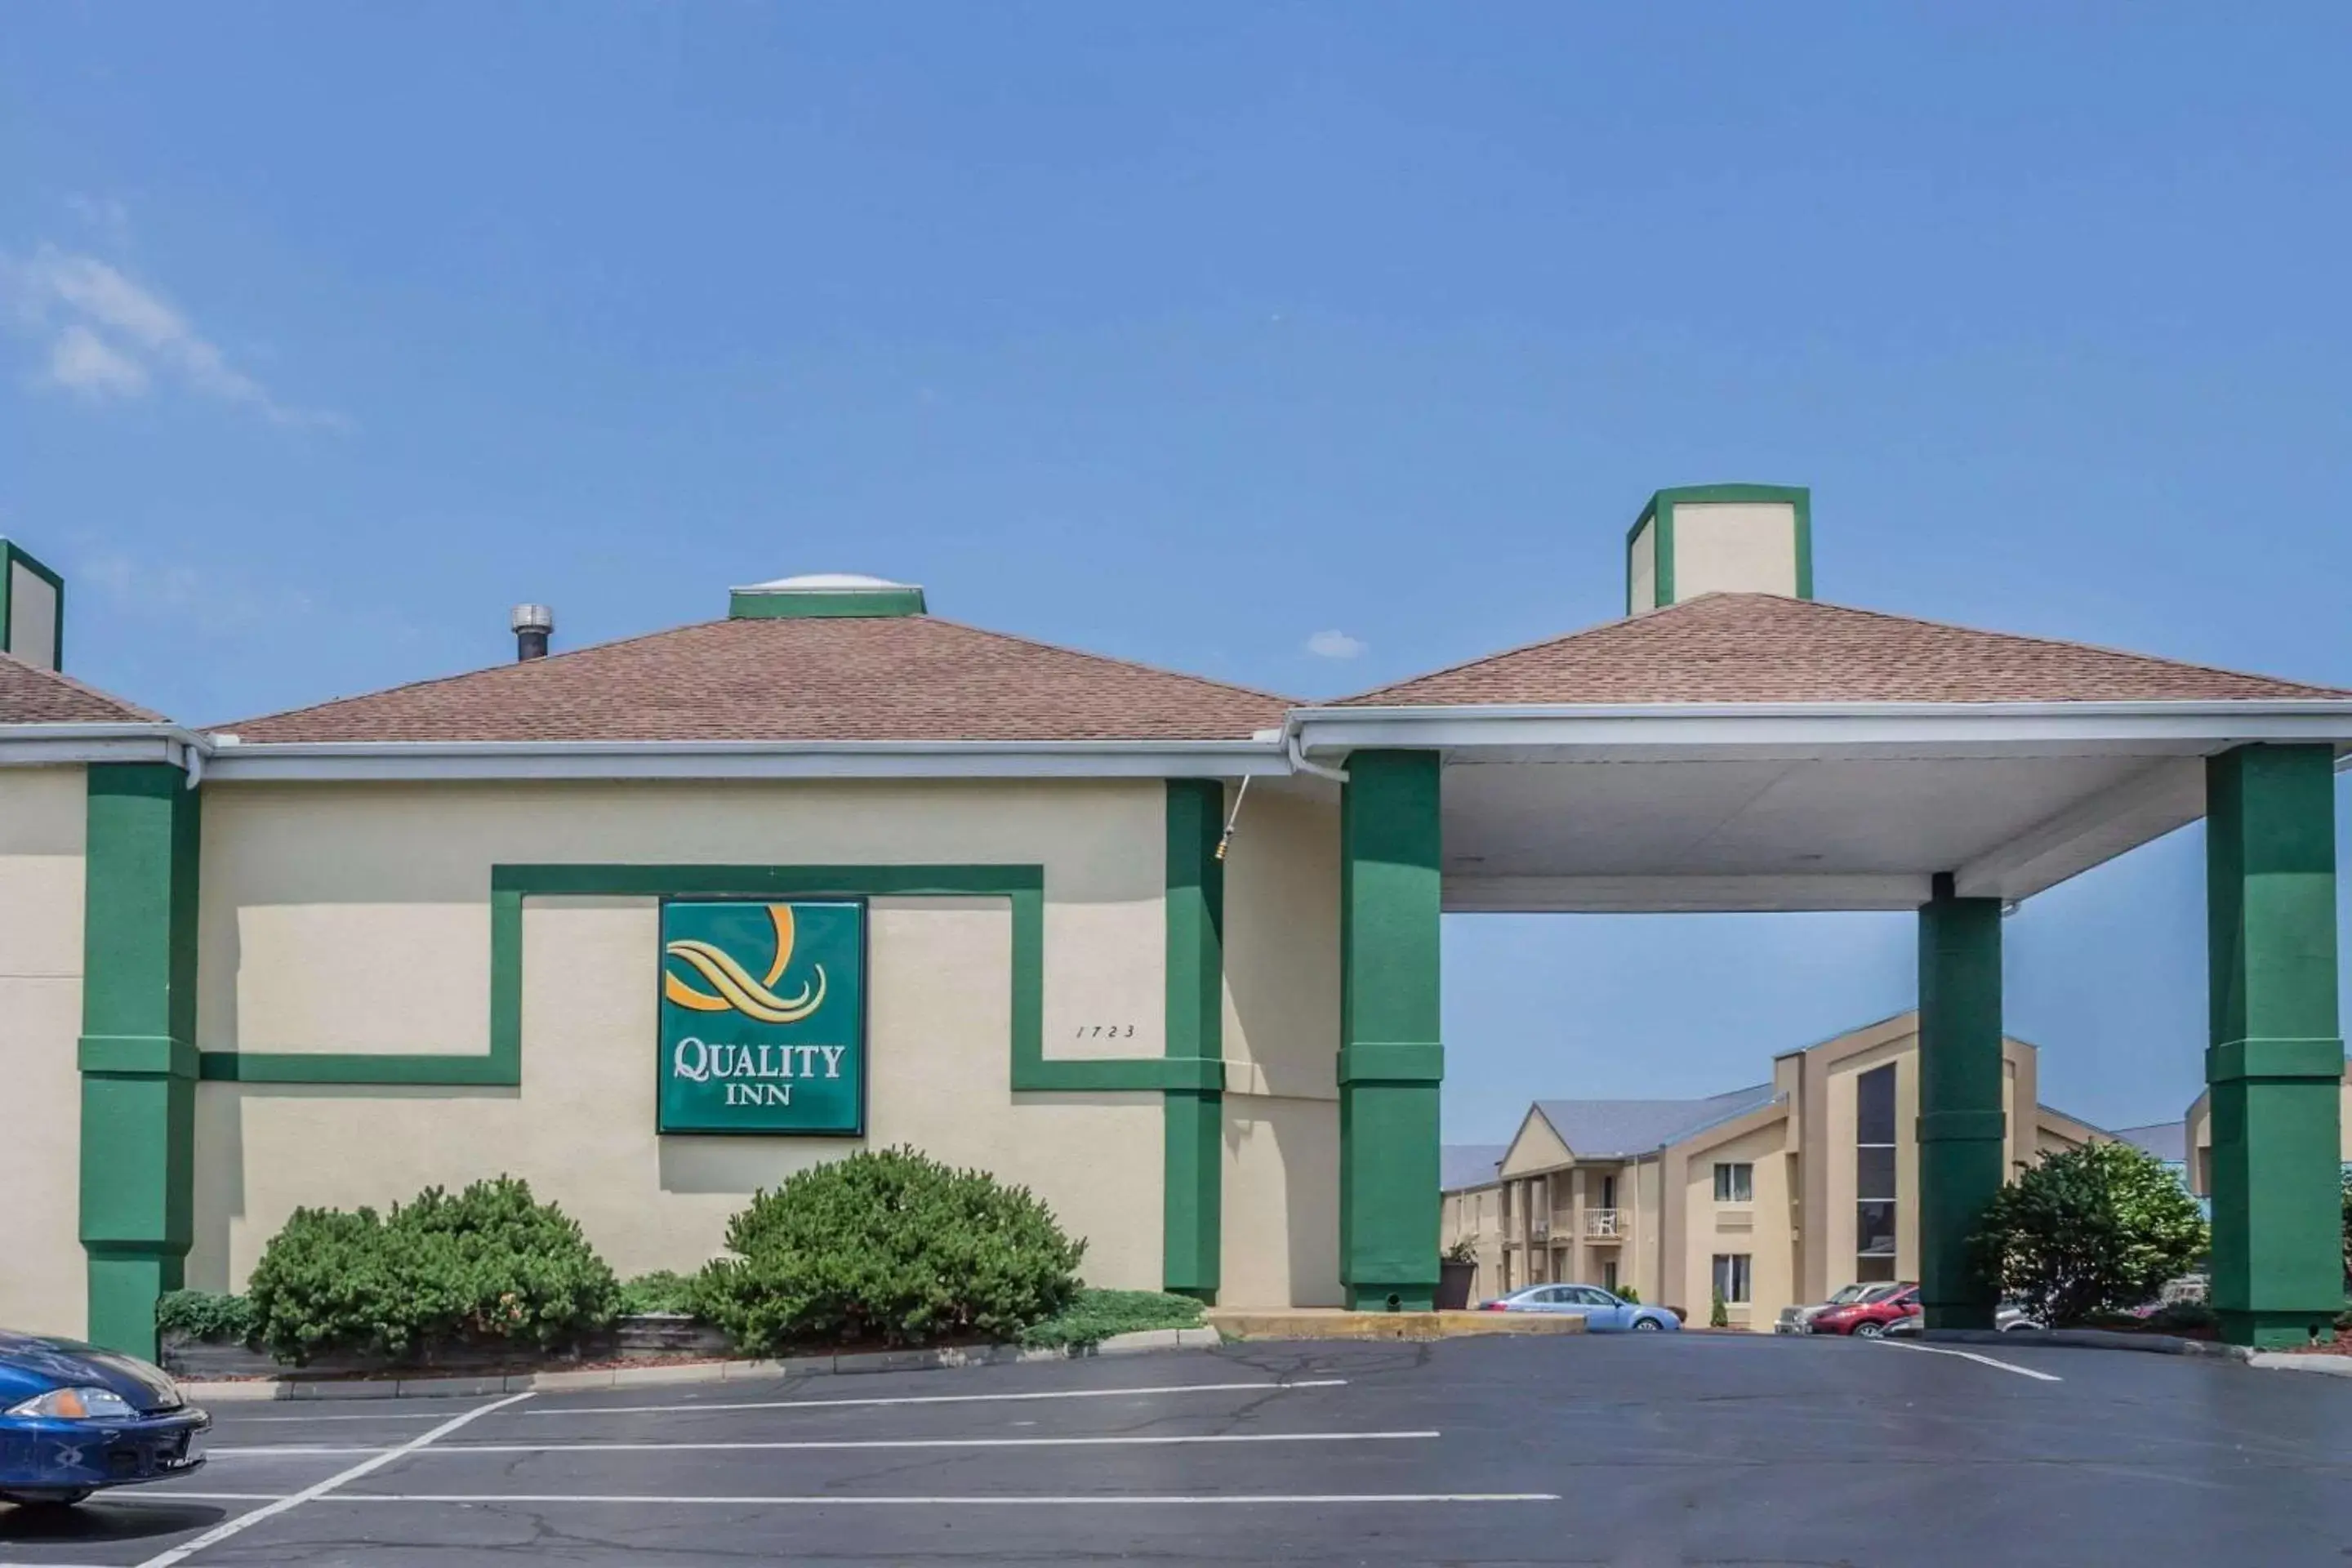 Property building in Quality Inn Port Clinton